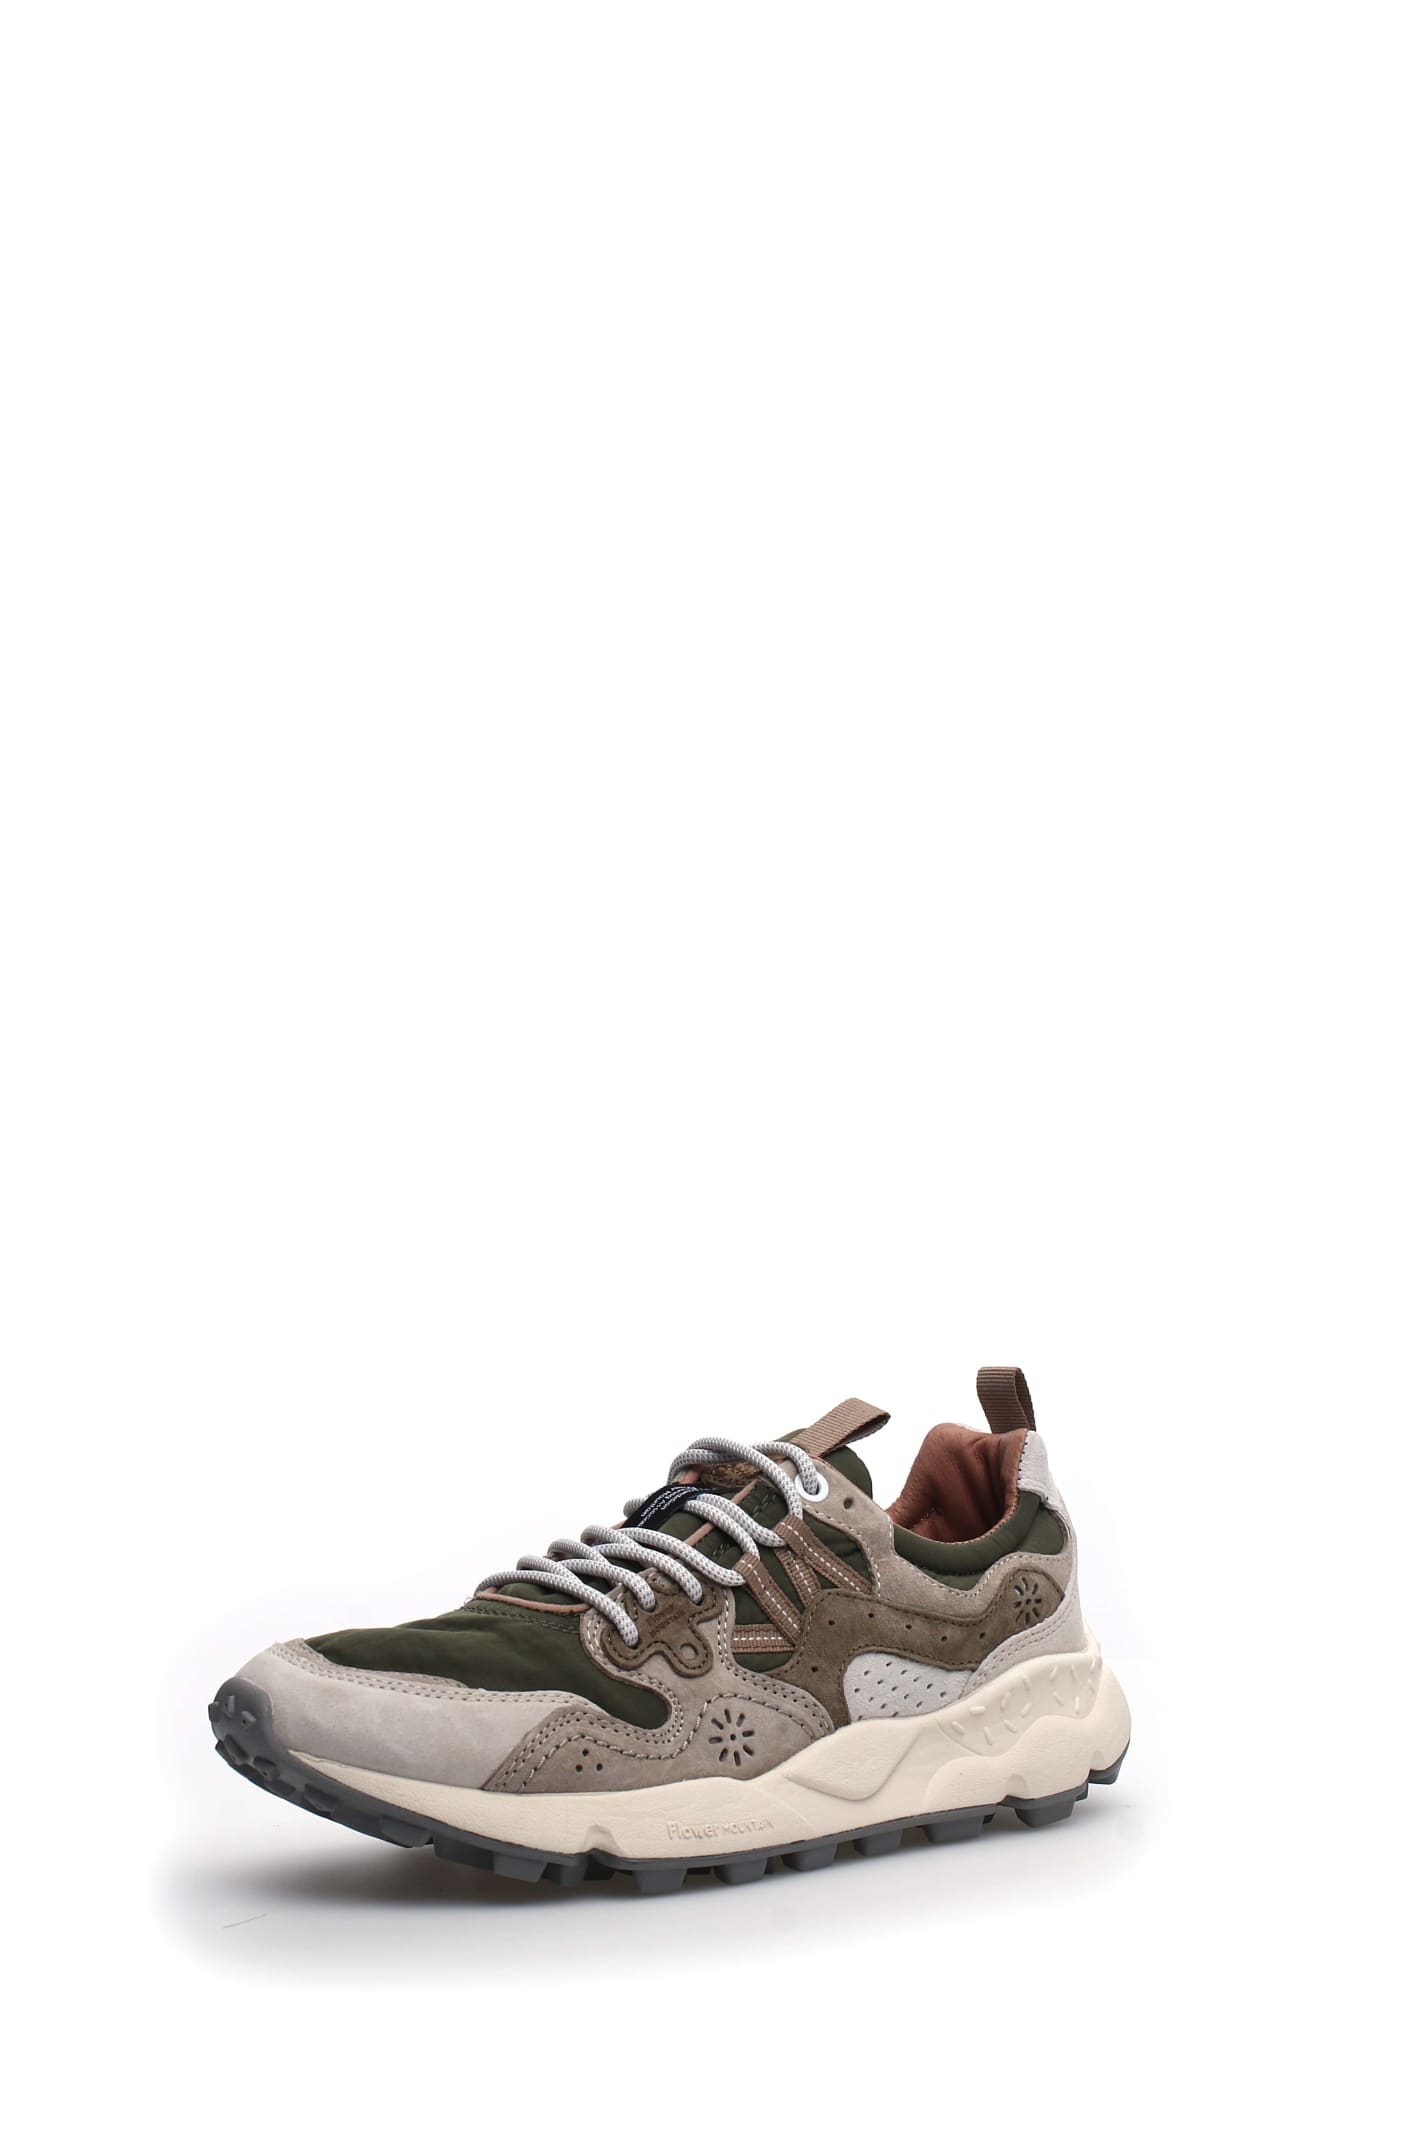 Shop Flower Mountain Yamano 3 Uni In Off White Military Green